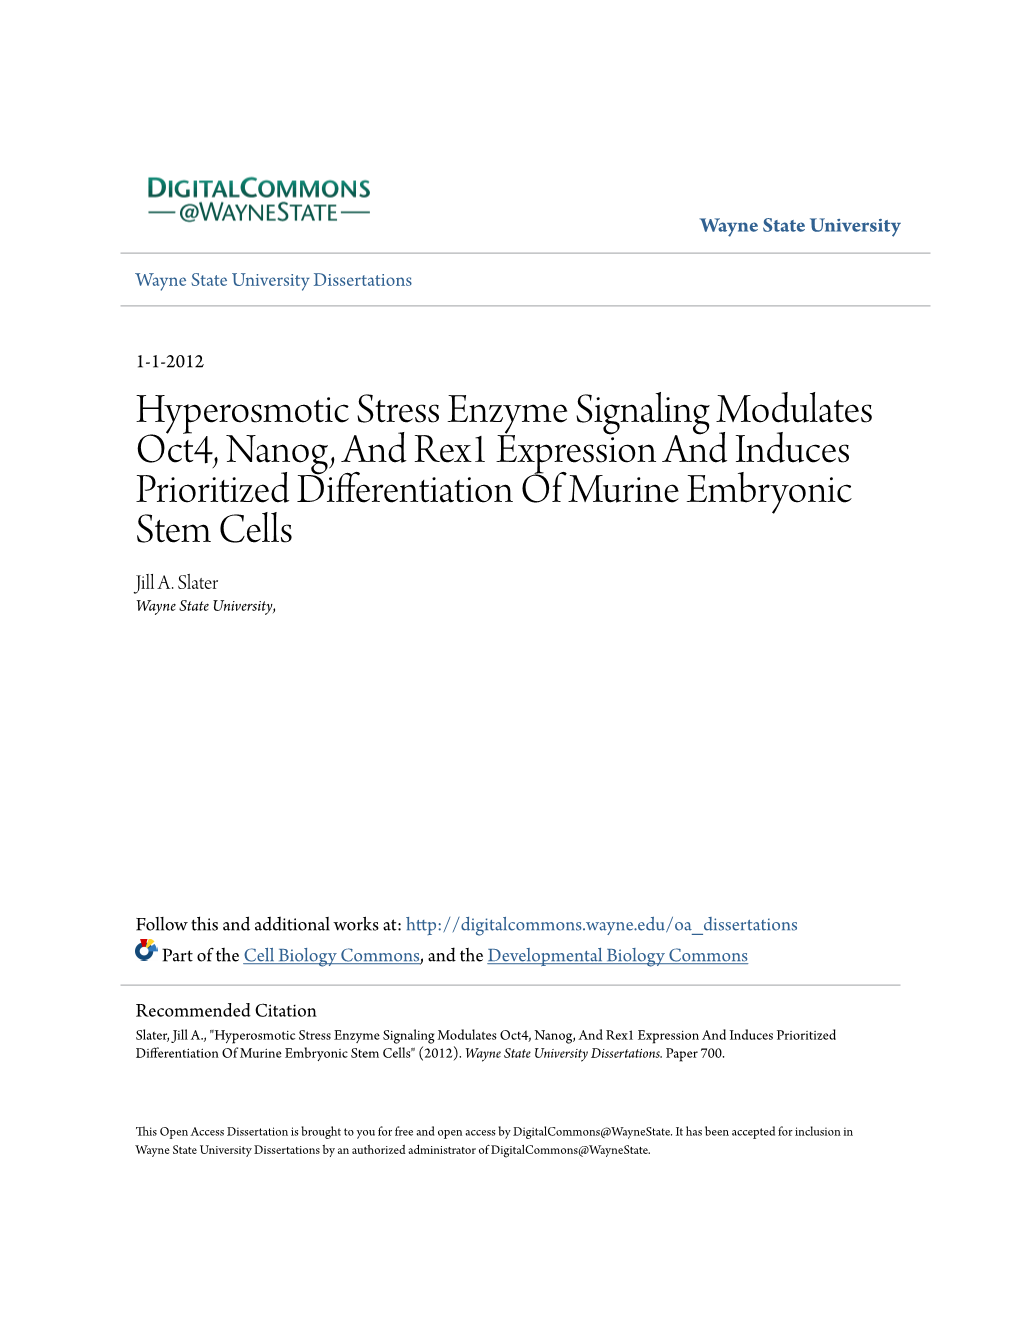 Hyperosmotic Stress Enzyme Signaling Modulates Oct4, Nanog, and Rex1 Expression and Induces Prioritized Differentiation of Murine Embryonic Stem Cells Jill A